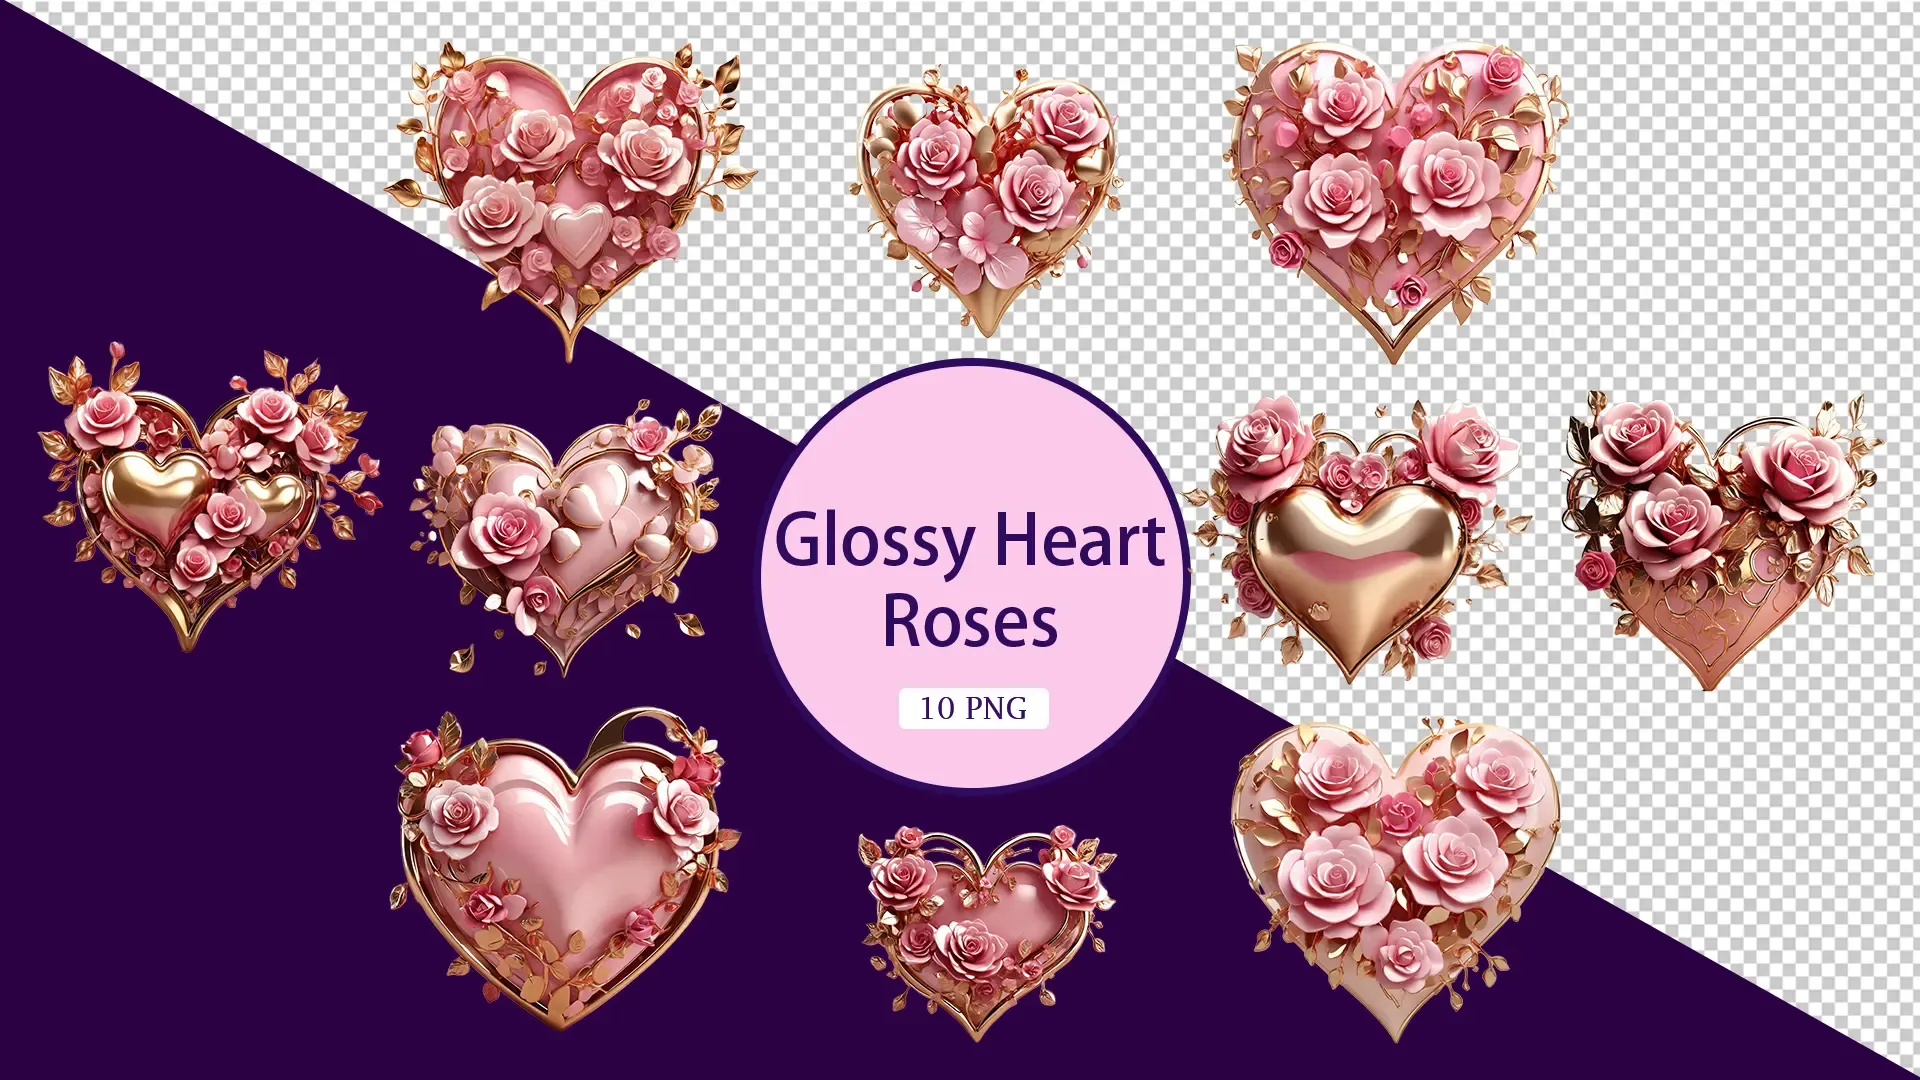 Luxurious 3D Glossy Heart Roses Pack